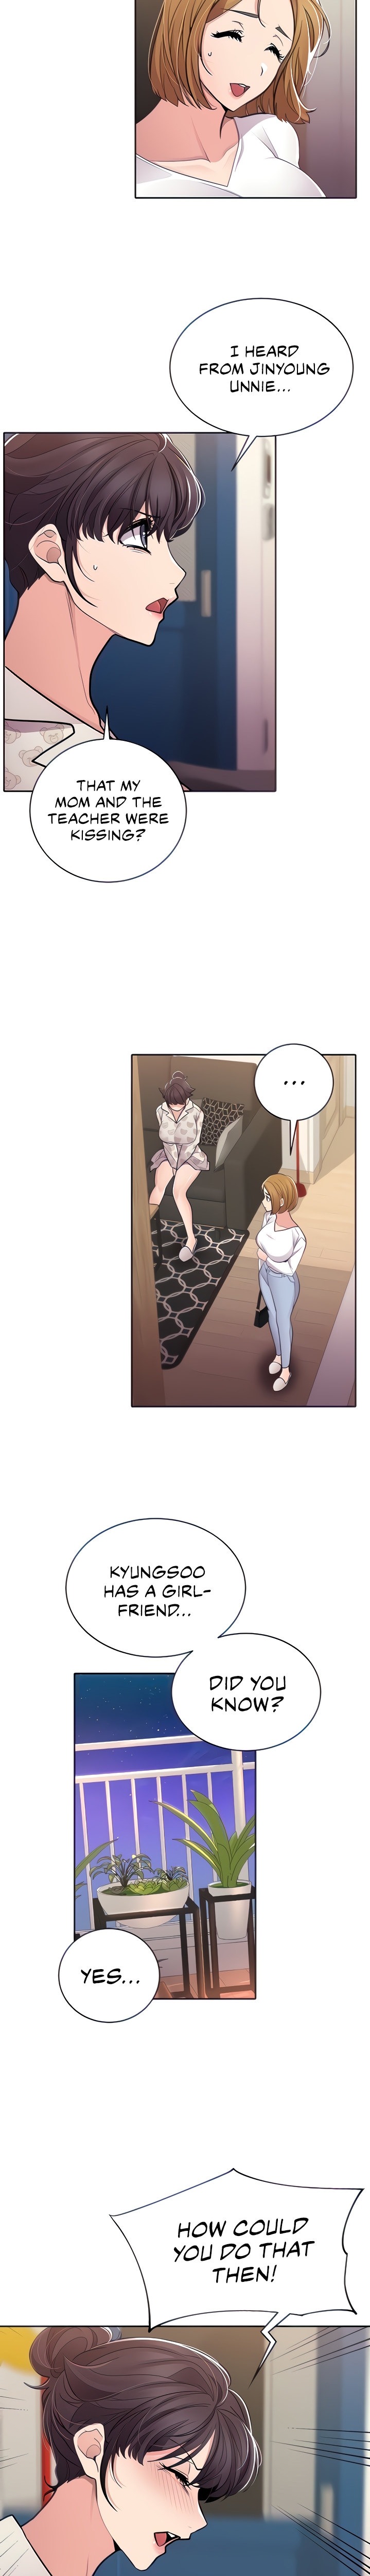 Meeting you again - Chapter 34 Page 5